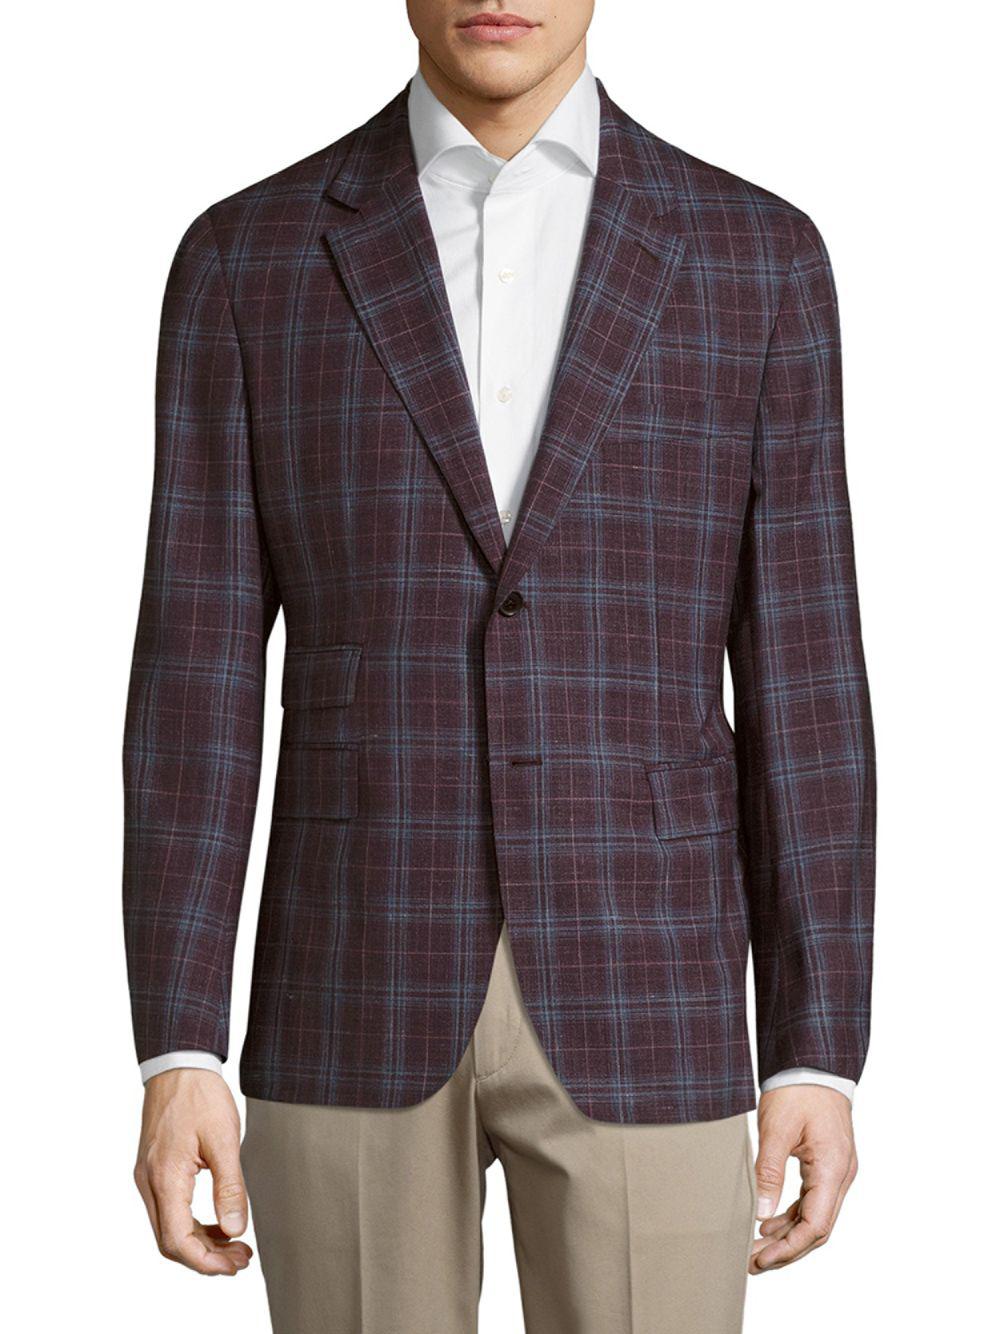 Façonnable Wool Checkered Jacket in Brown for Men - Lyst